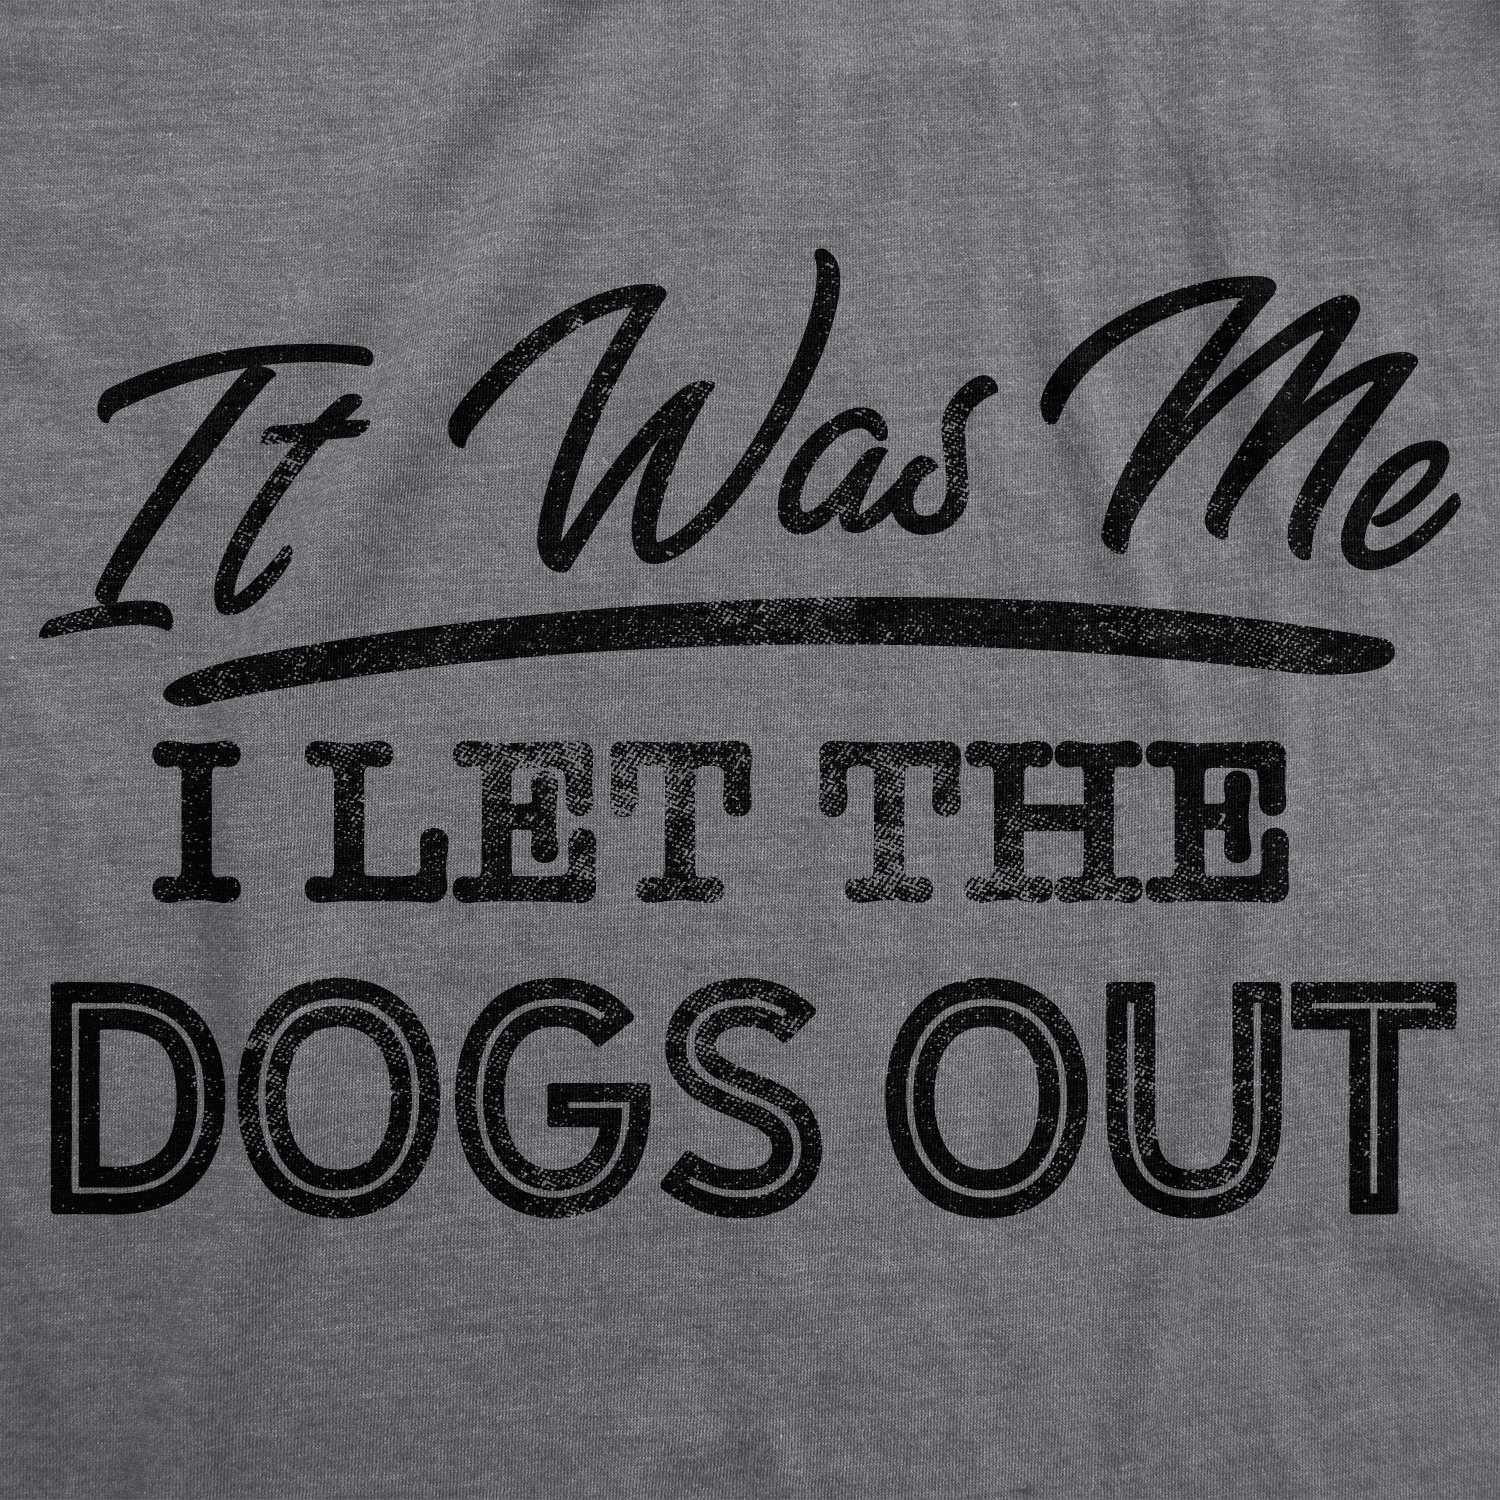 Crazy Dog Tshirts Mens It Was Me I Let The Dogs Out Tshirt Funny Song Lyrics Who Let The Dogs Out Tee